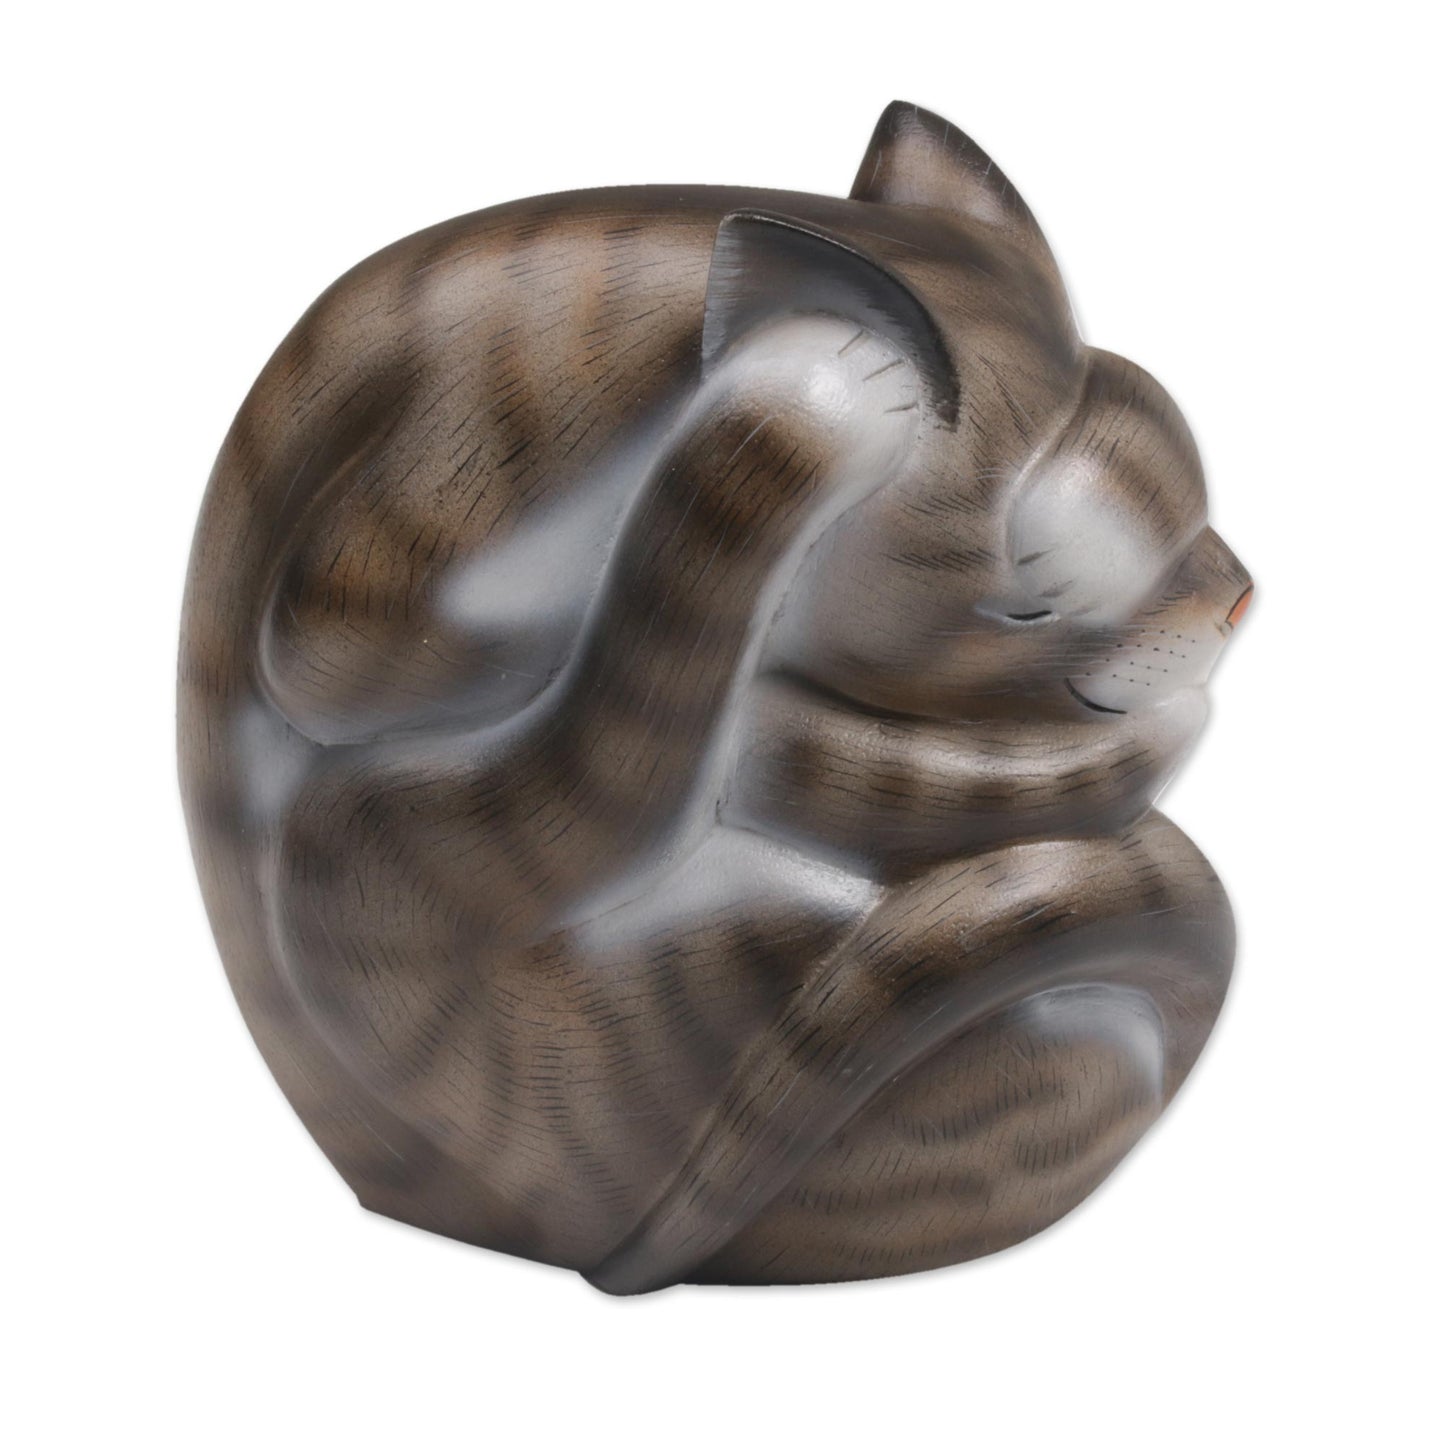 Virtuous Kitty Curled Wood Cat Sculpture in Grey and White from Bali